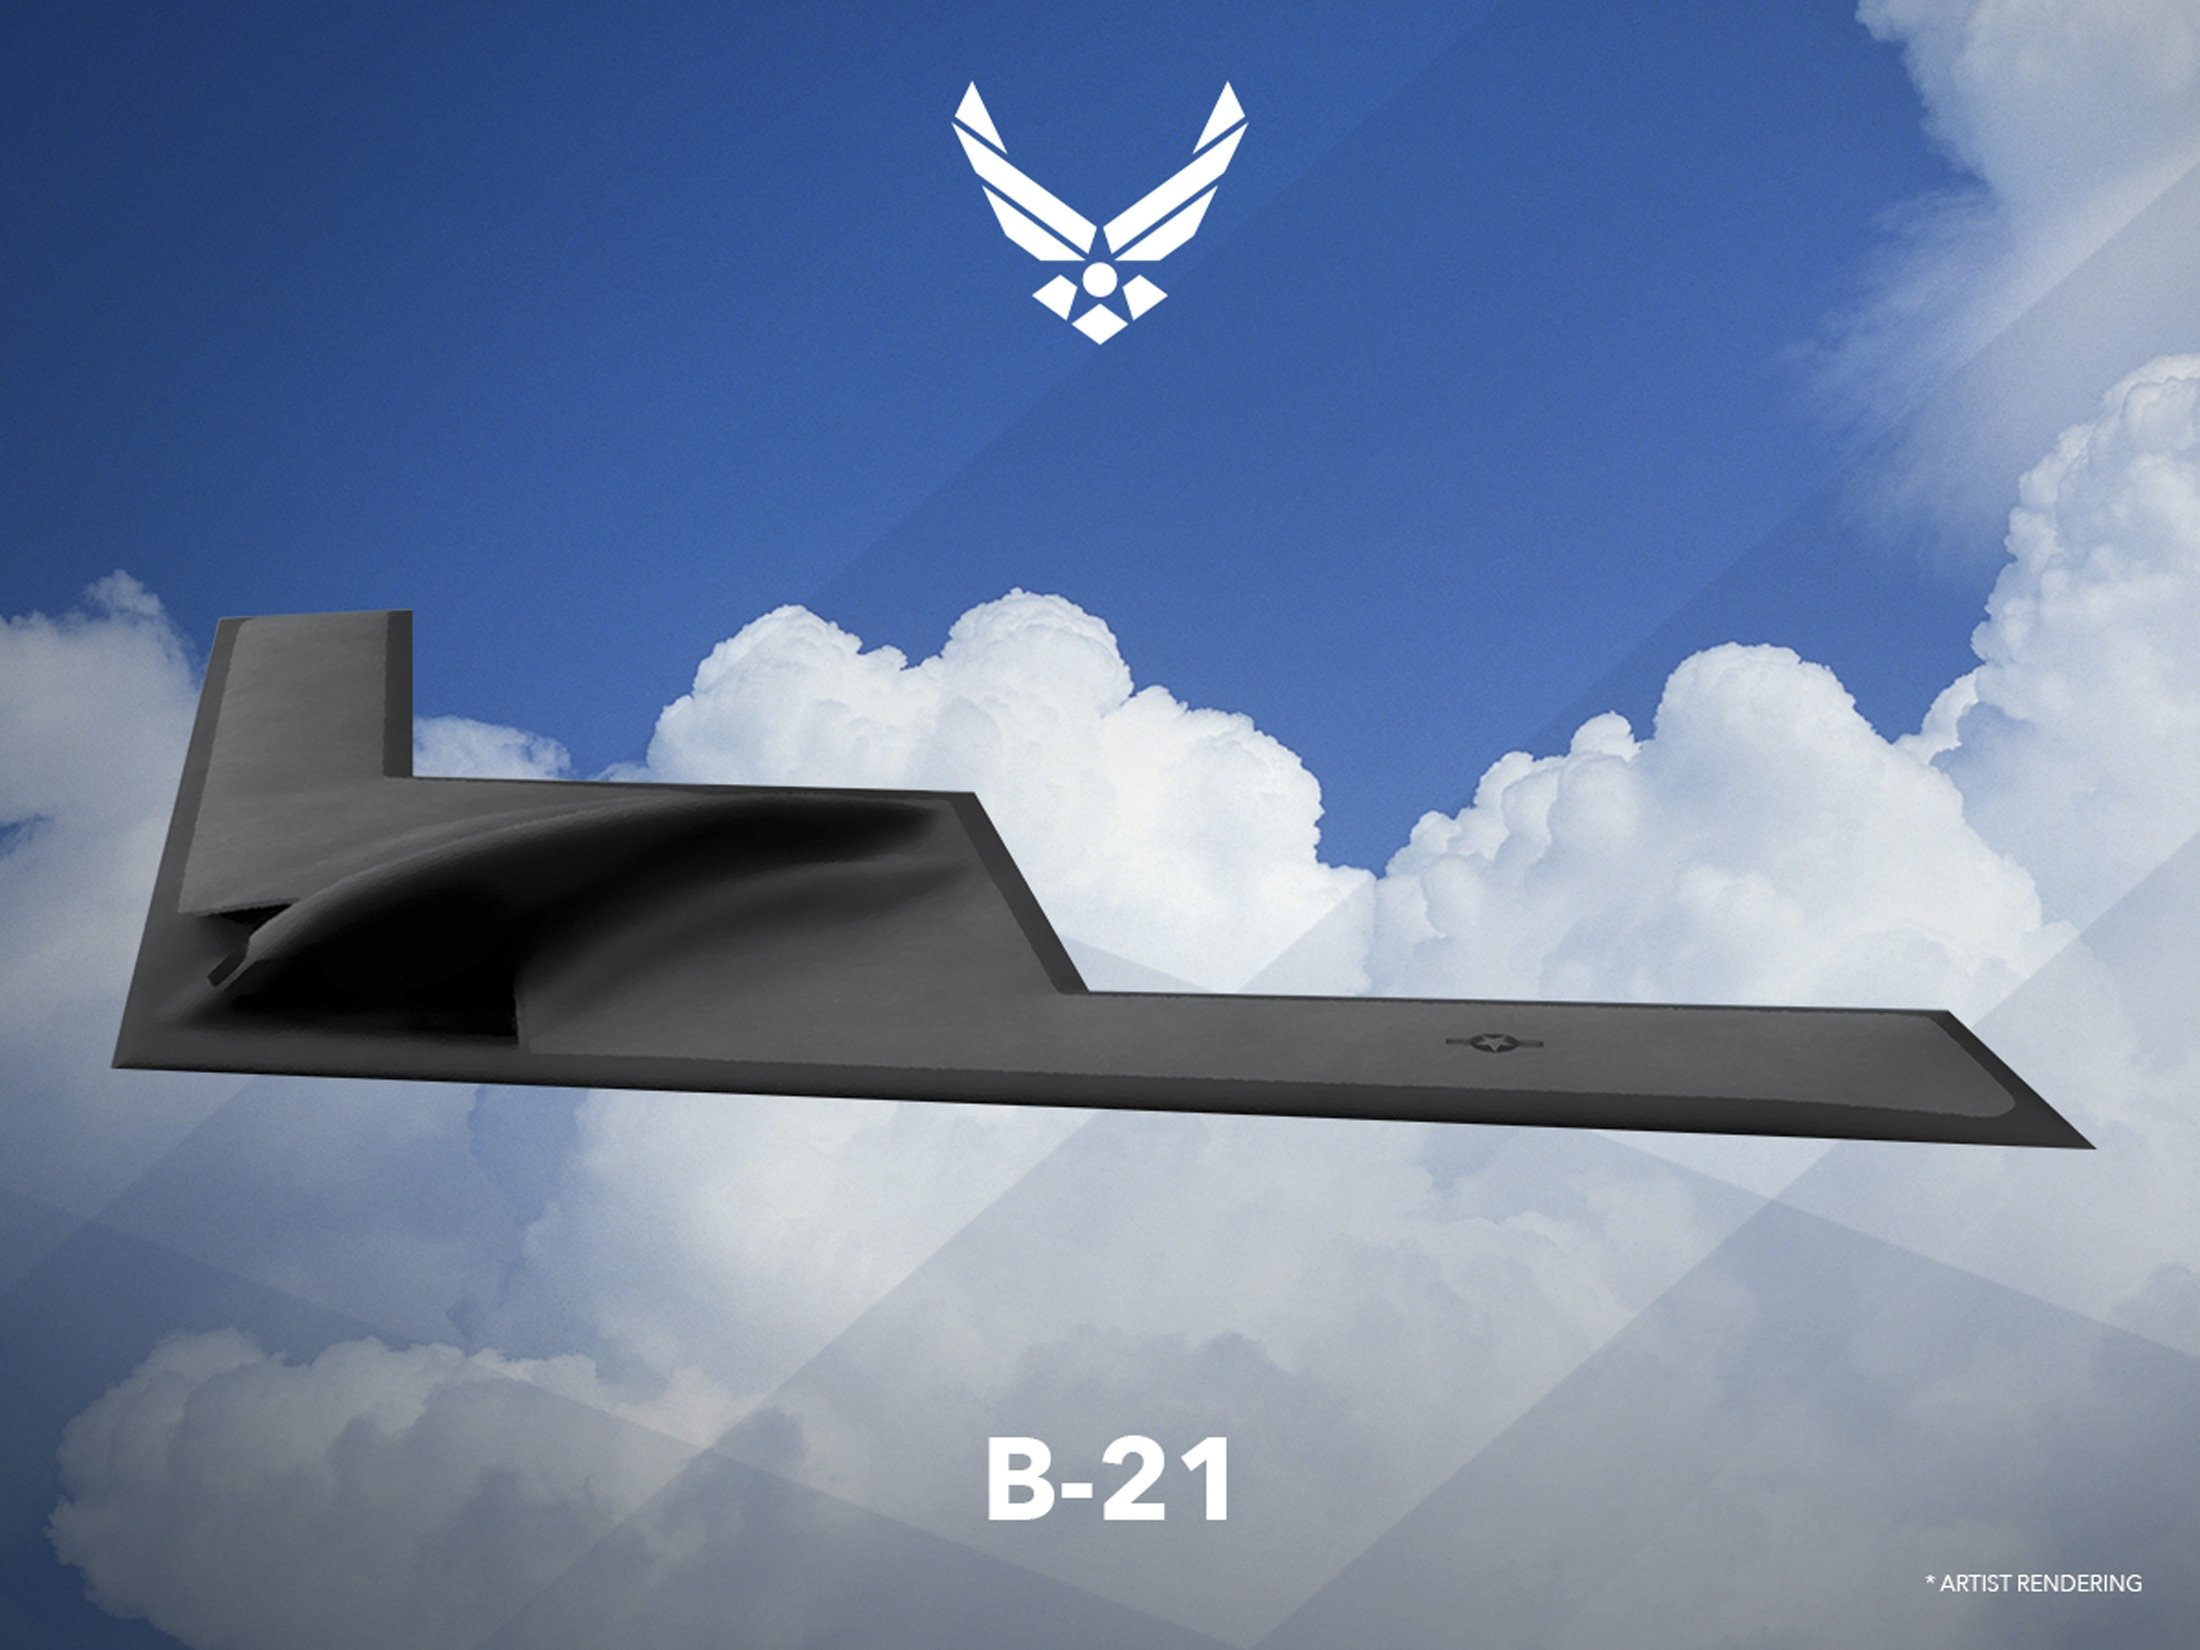 An artist rendering shows the first image of a new Northrop Grumman Corp long-range bomber B21, released on Feb. 26, 2016. (U.S. Air Force—Reuters)